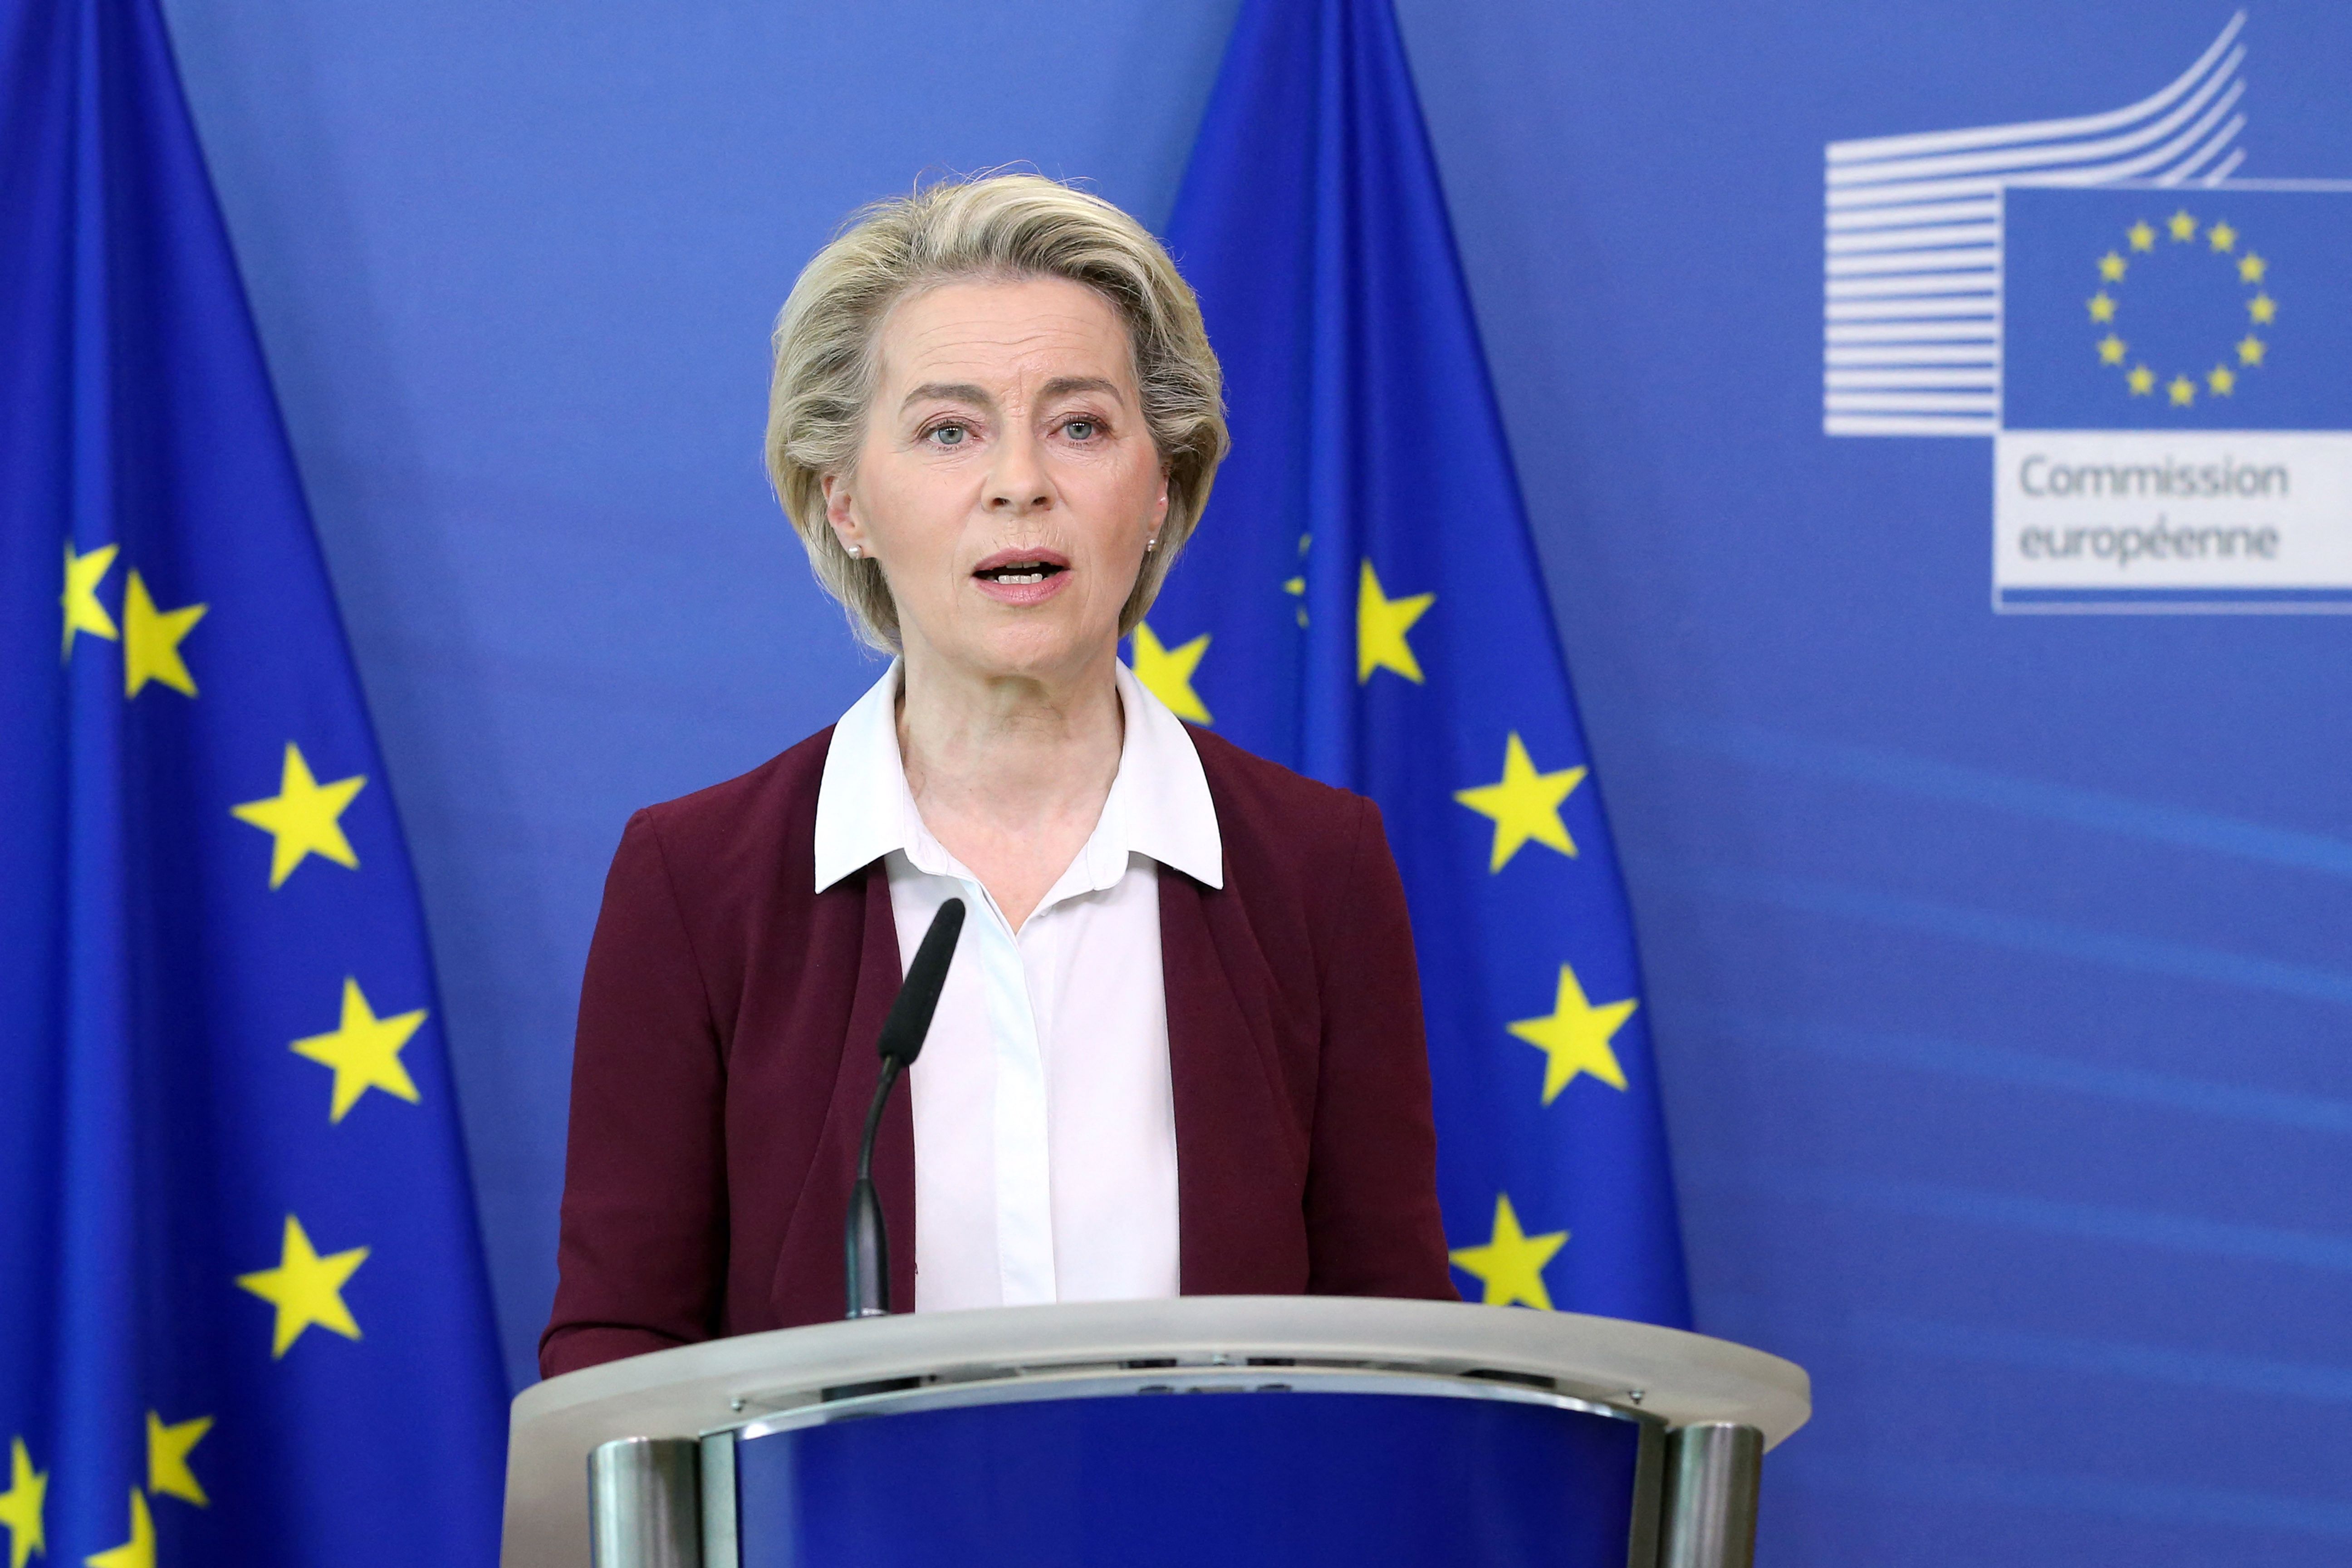 President of the European Commission, Ursula von der Leyen, speaks during a press conference at the EU headquarters in Brussels on July 10, 2021. 